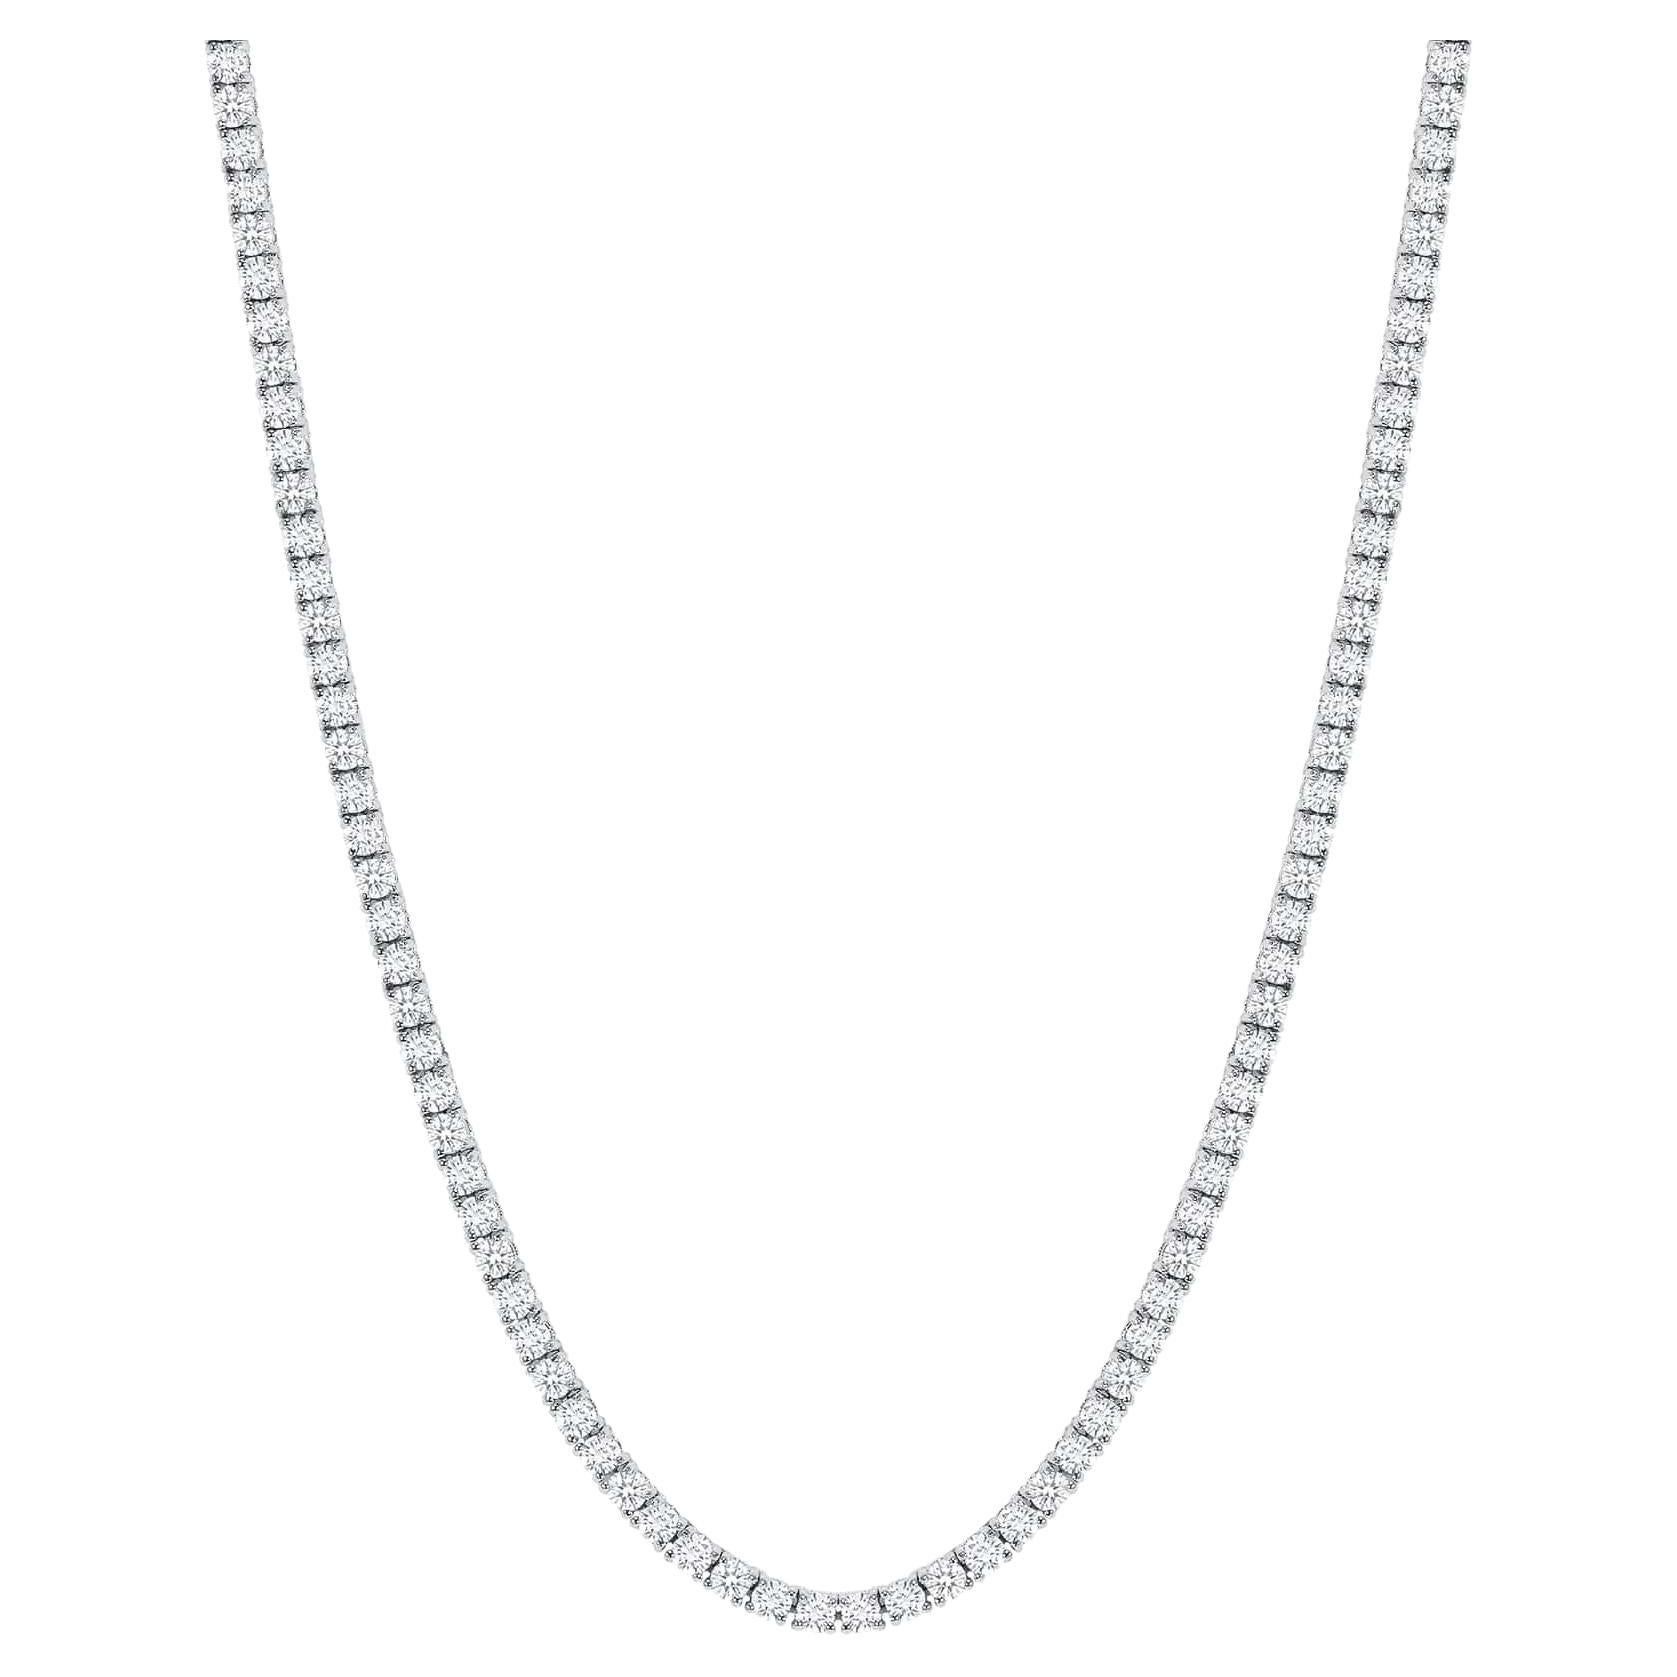 This diamond tennis necklace features beautifully cut round diamonds set gorgeously in 14k gold

Necklace Information
Metal : 14k Gold
Diamond Cut : Round Natural Diamond
Total Diamond Carats : 1 Carat
Diamond Clarity : VS -SI
Diamond Color :